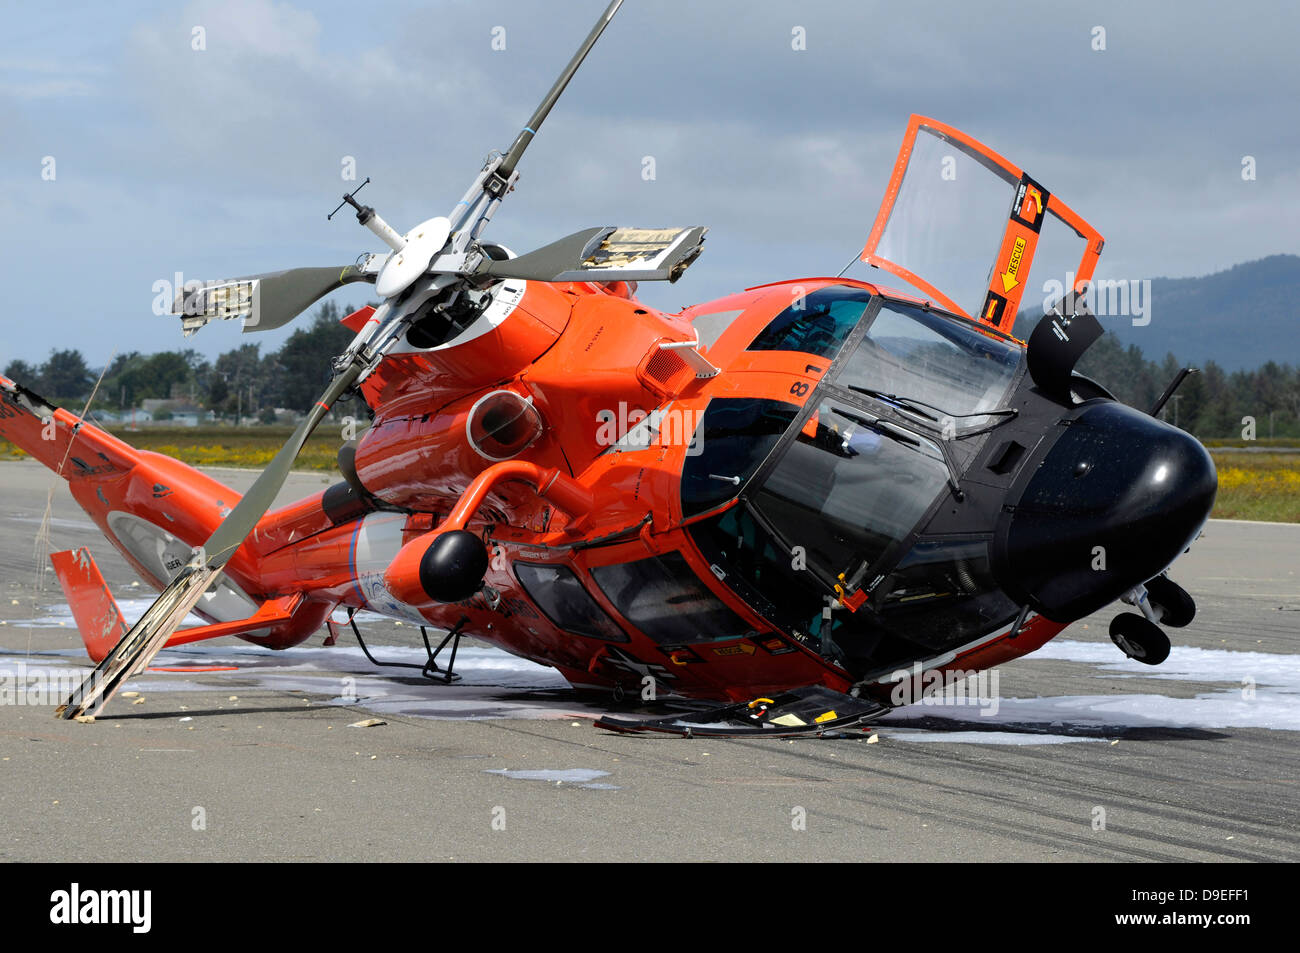 A U.S. Coast Guard MH-65 Dolphin helicopter lays on its side after it crashed at the Arcata Airport during a training mission. Stock Photo